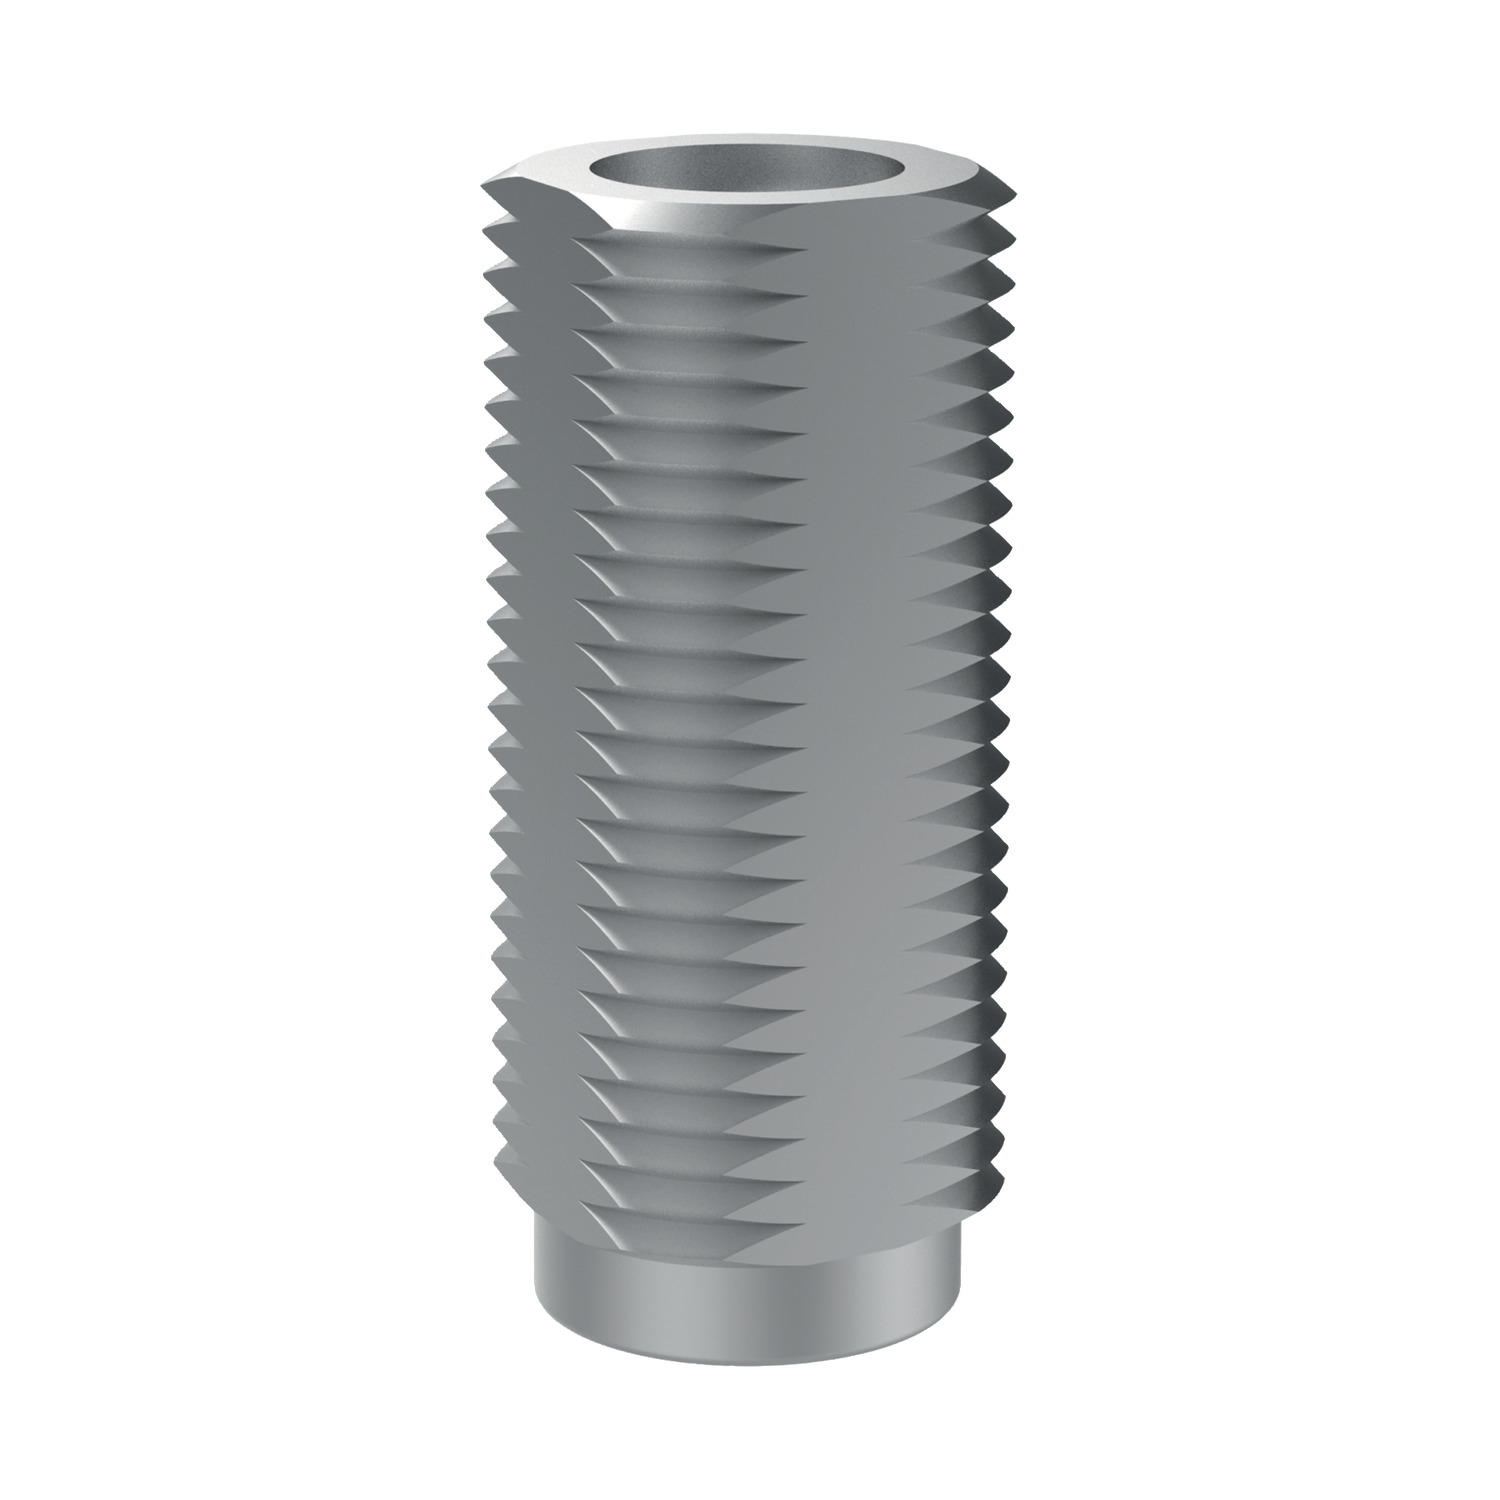 Side-Thrust Pins - Threaded Threaded side thrust pins for use with pins of your own design. Available with or without seals.